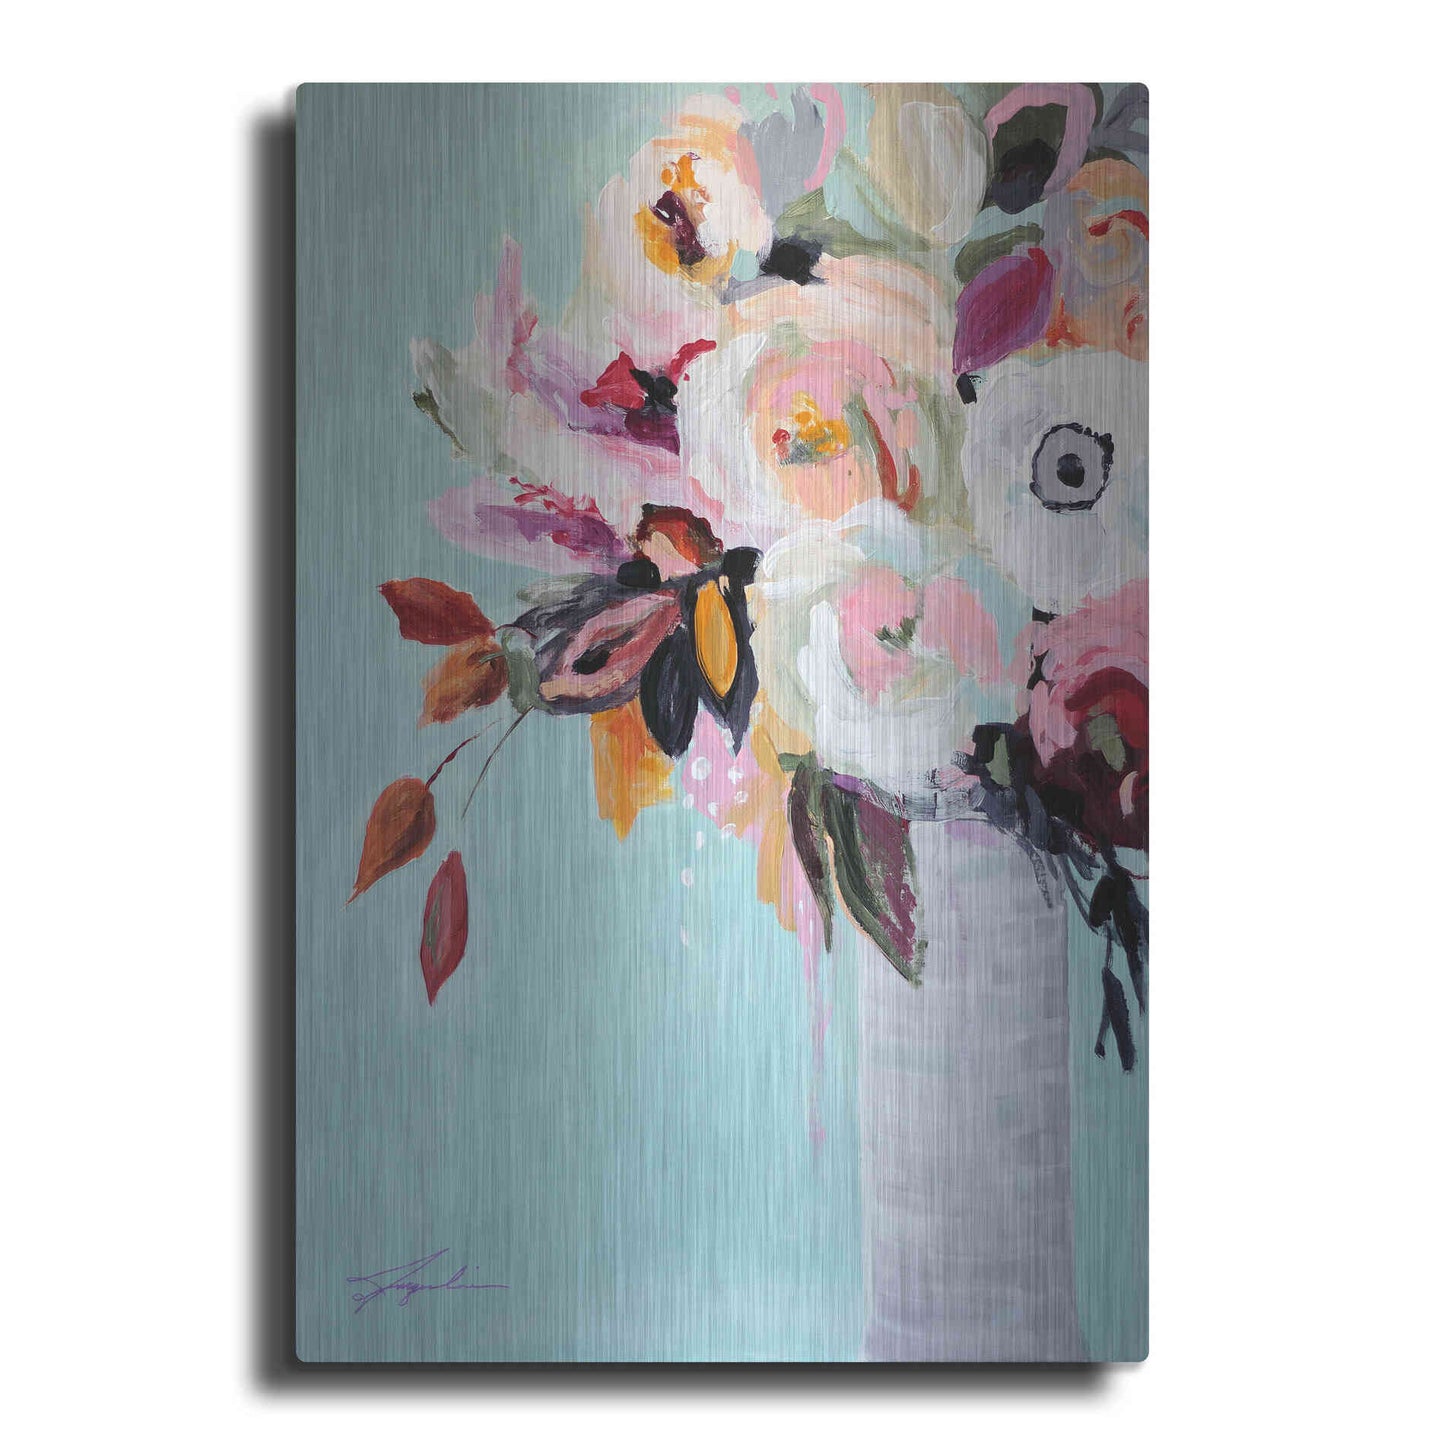 Luxe Metal Art 'Fall Into Summer' by Jacqueline Brewer Metal Wall Art